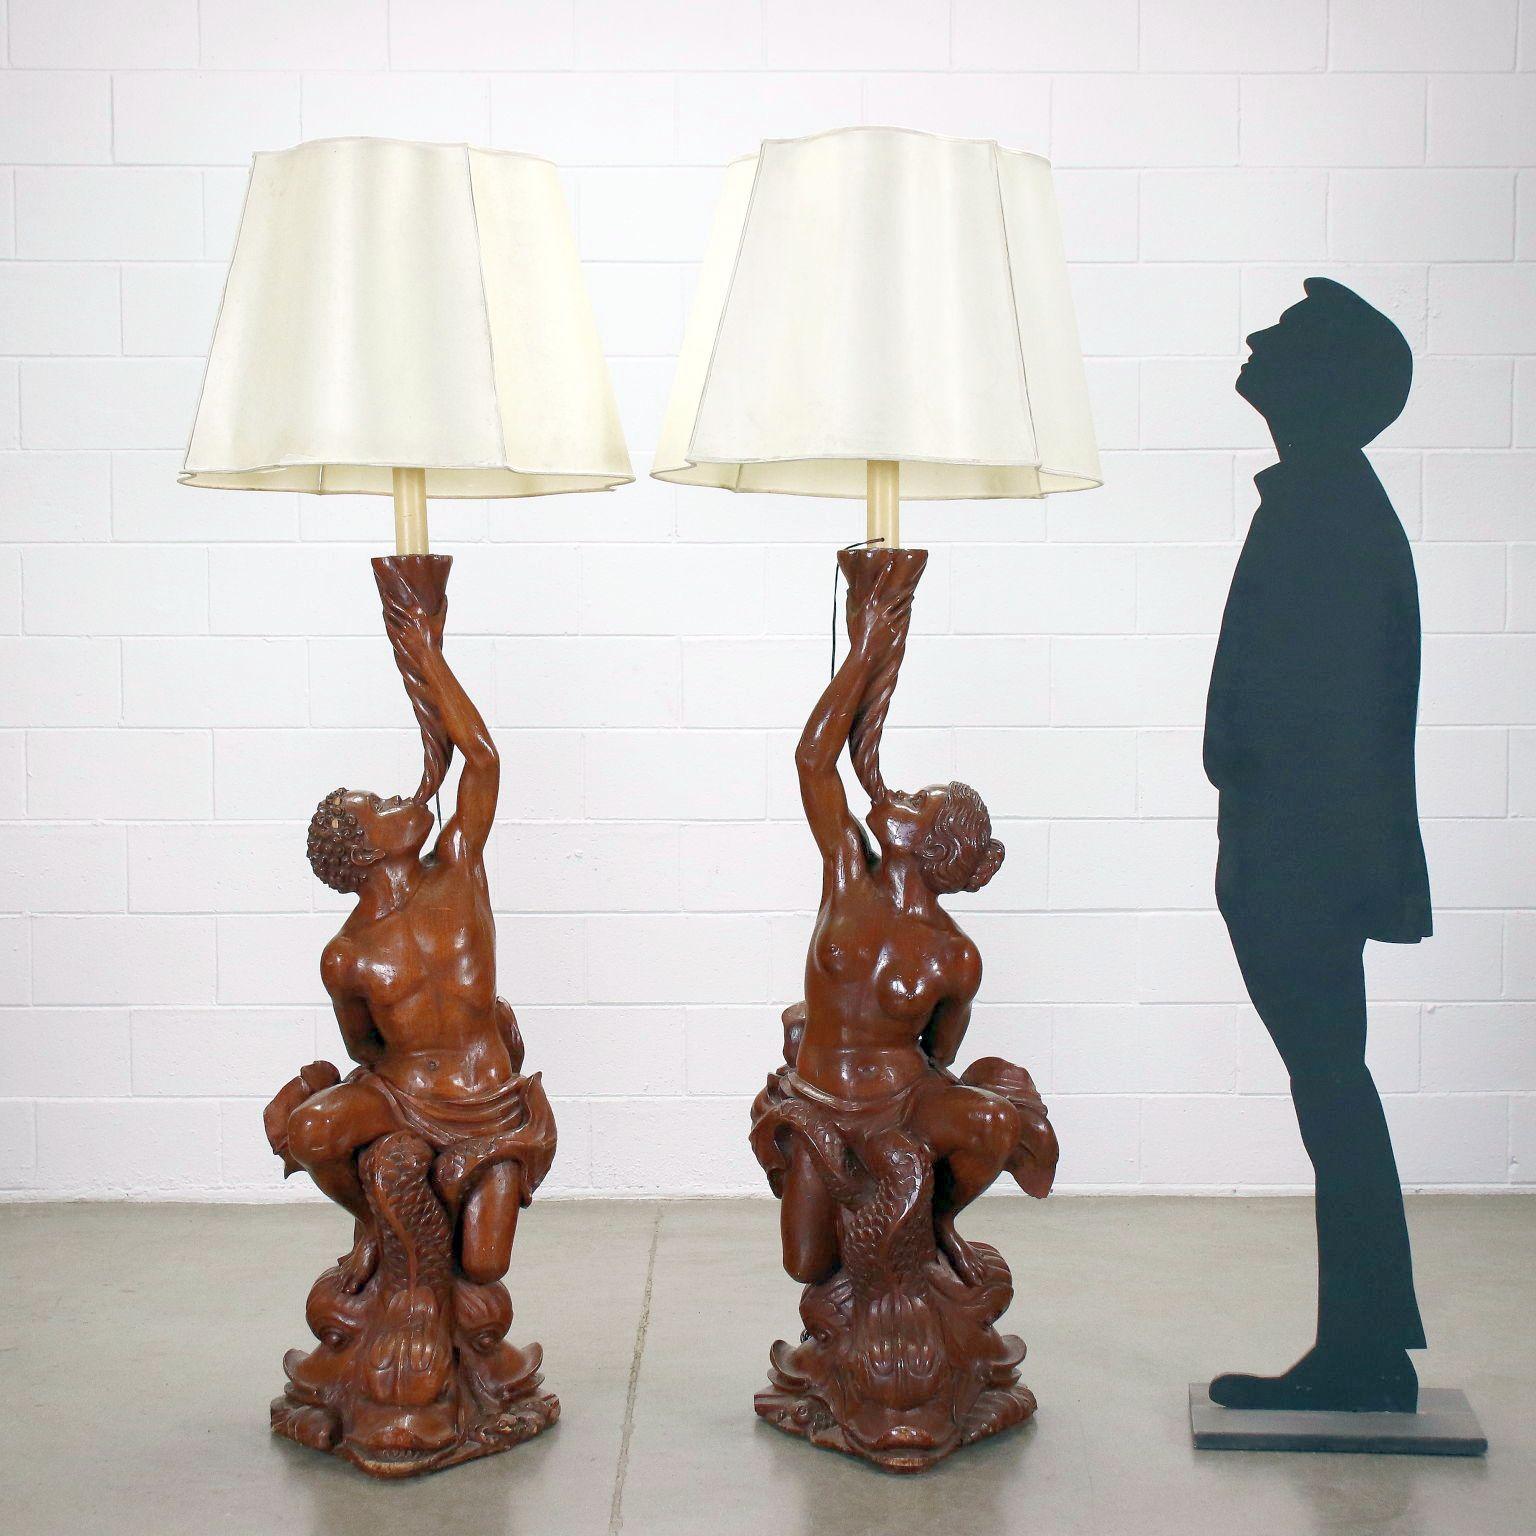 Pair of Italian Figural walnut Lamps - Circa 1820 For Sale 3